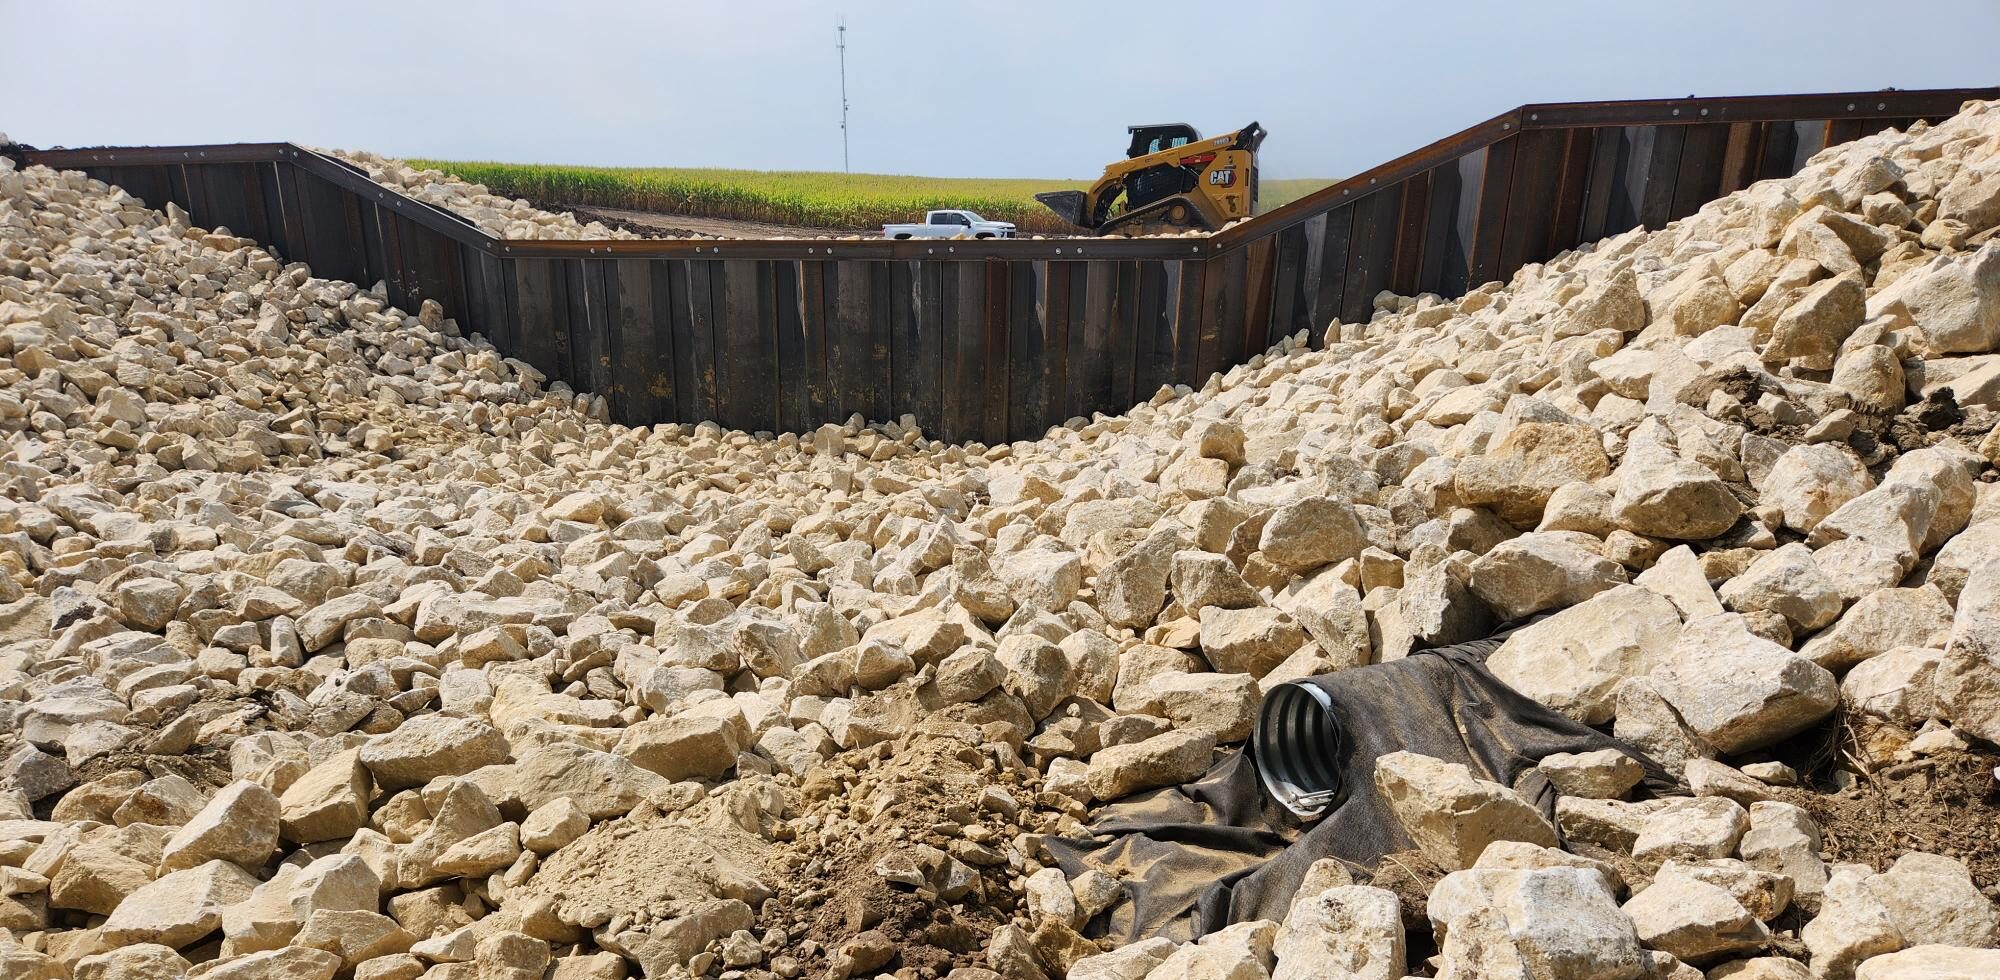 A wetland spillway and drain pipe is seen surrounded by large rocks.